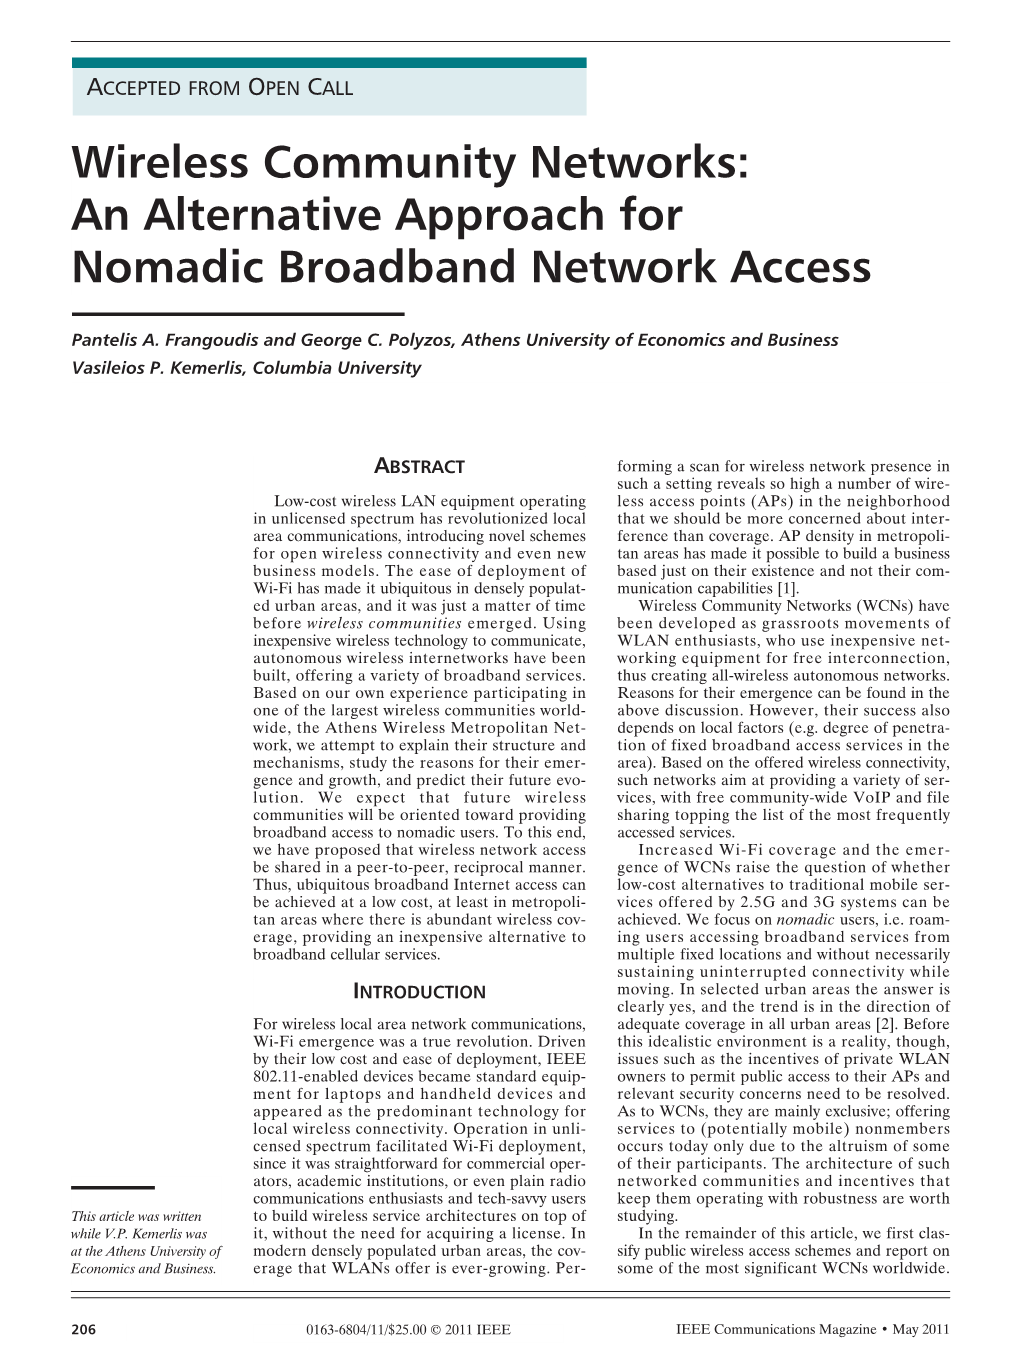 Wireless Community Networks: an Alternative Approach for Nomadic Broadband Network Access